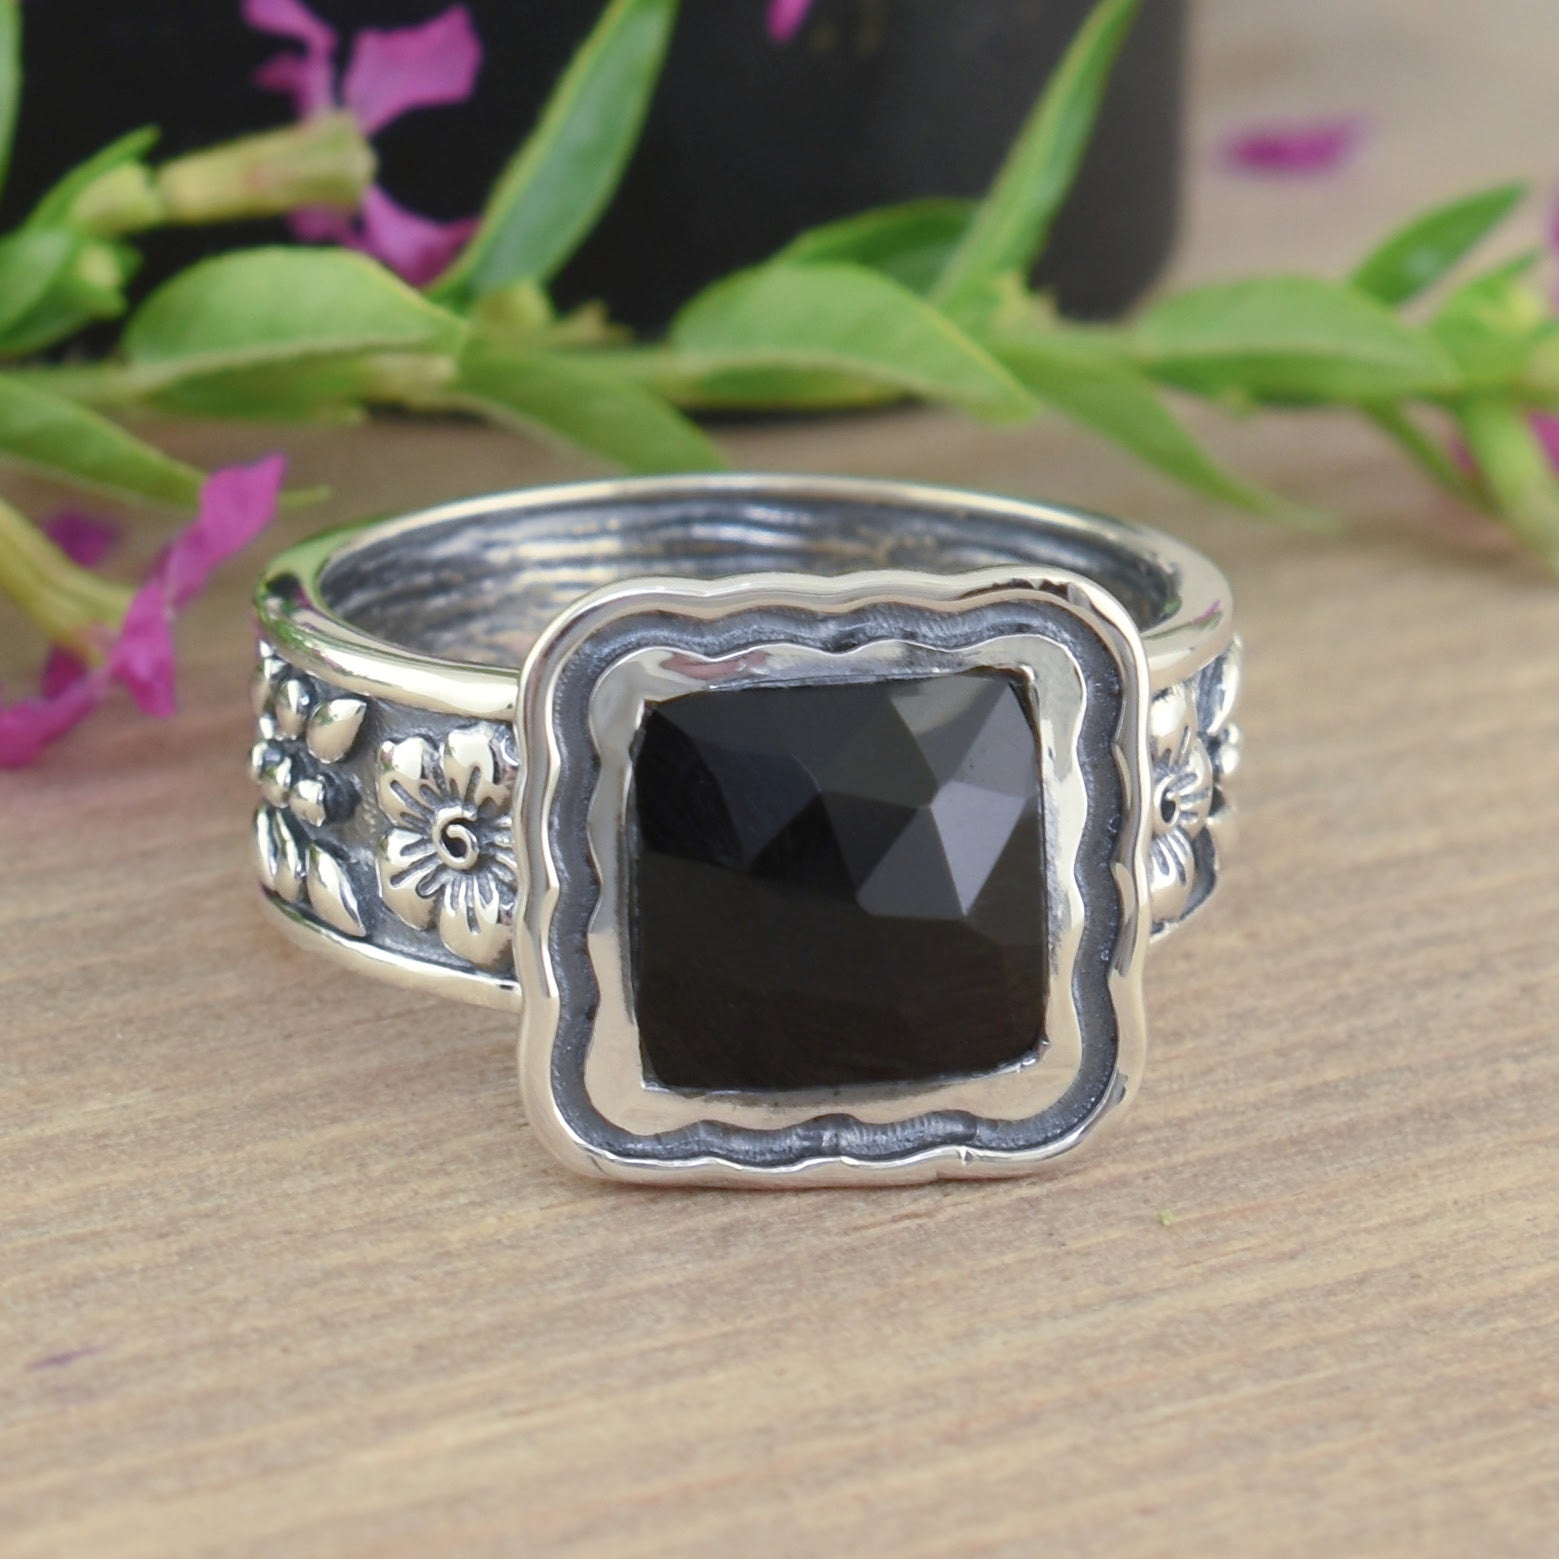 .925 sterling silver ring with square black onyx stone